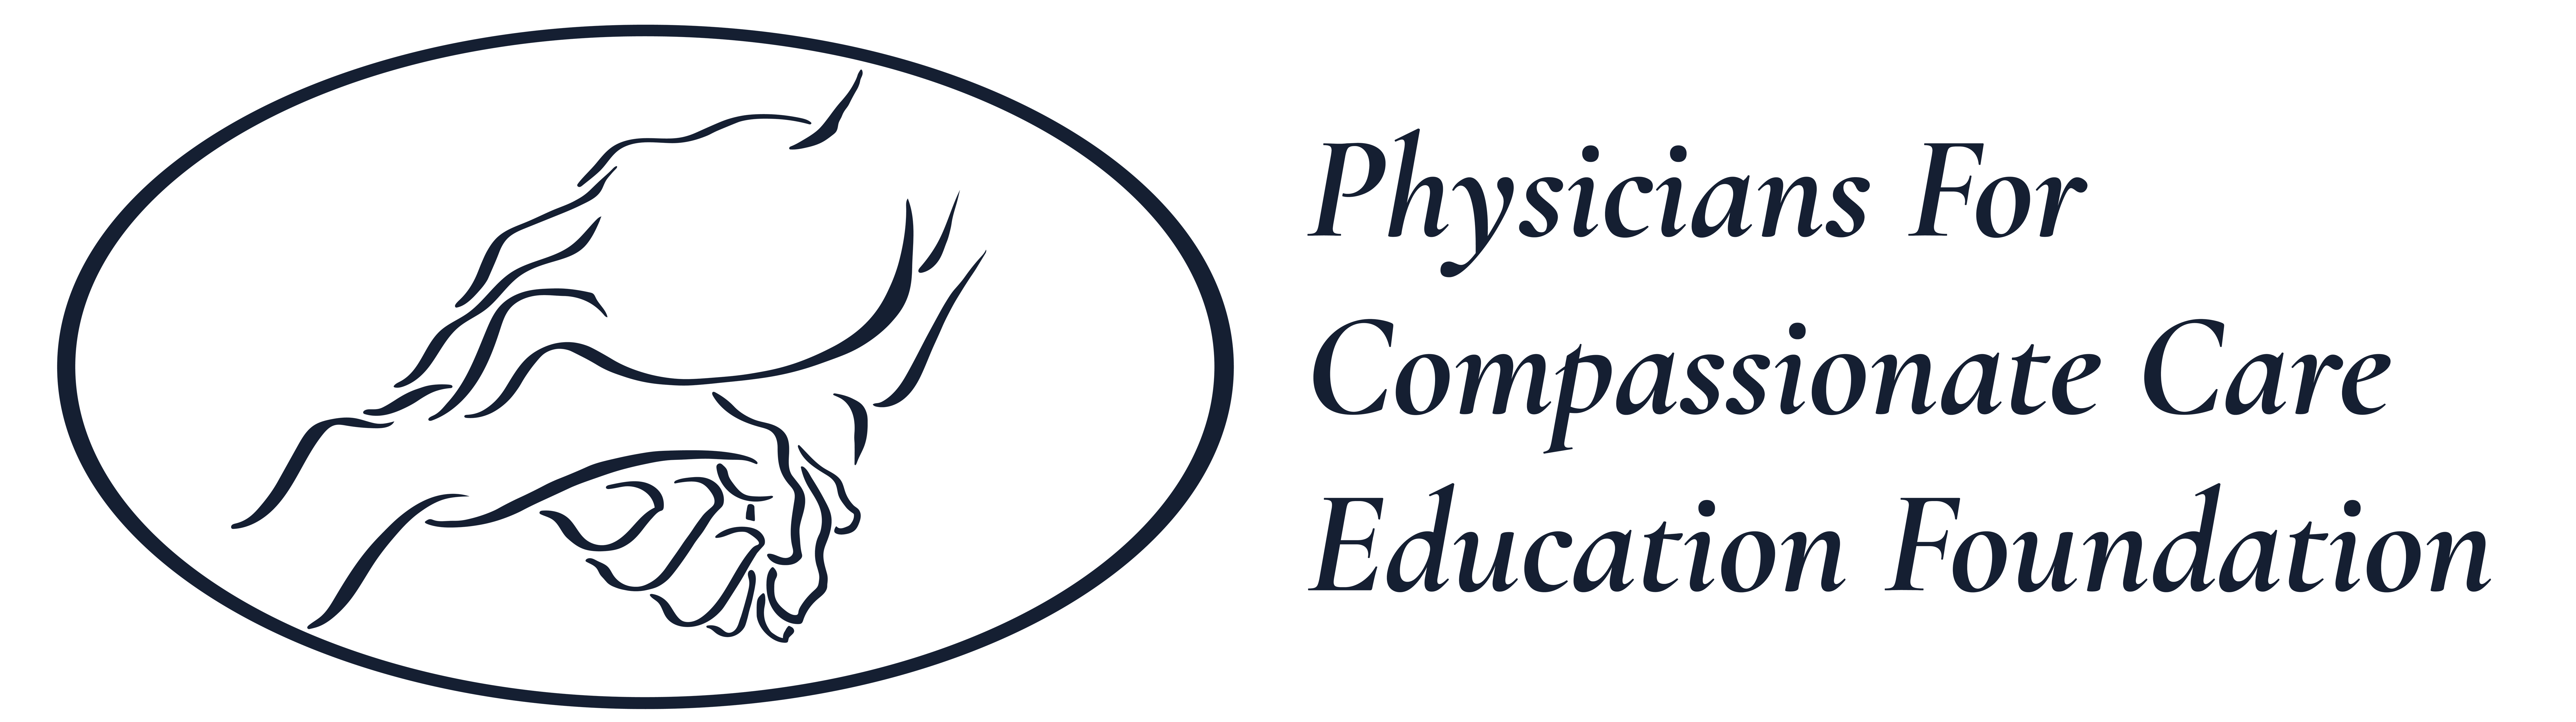 Physicians For Compassionate Care Education Foundation logo